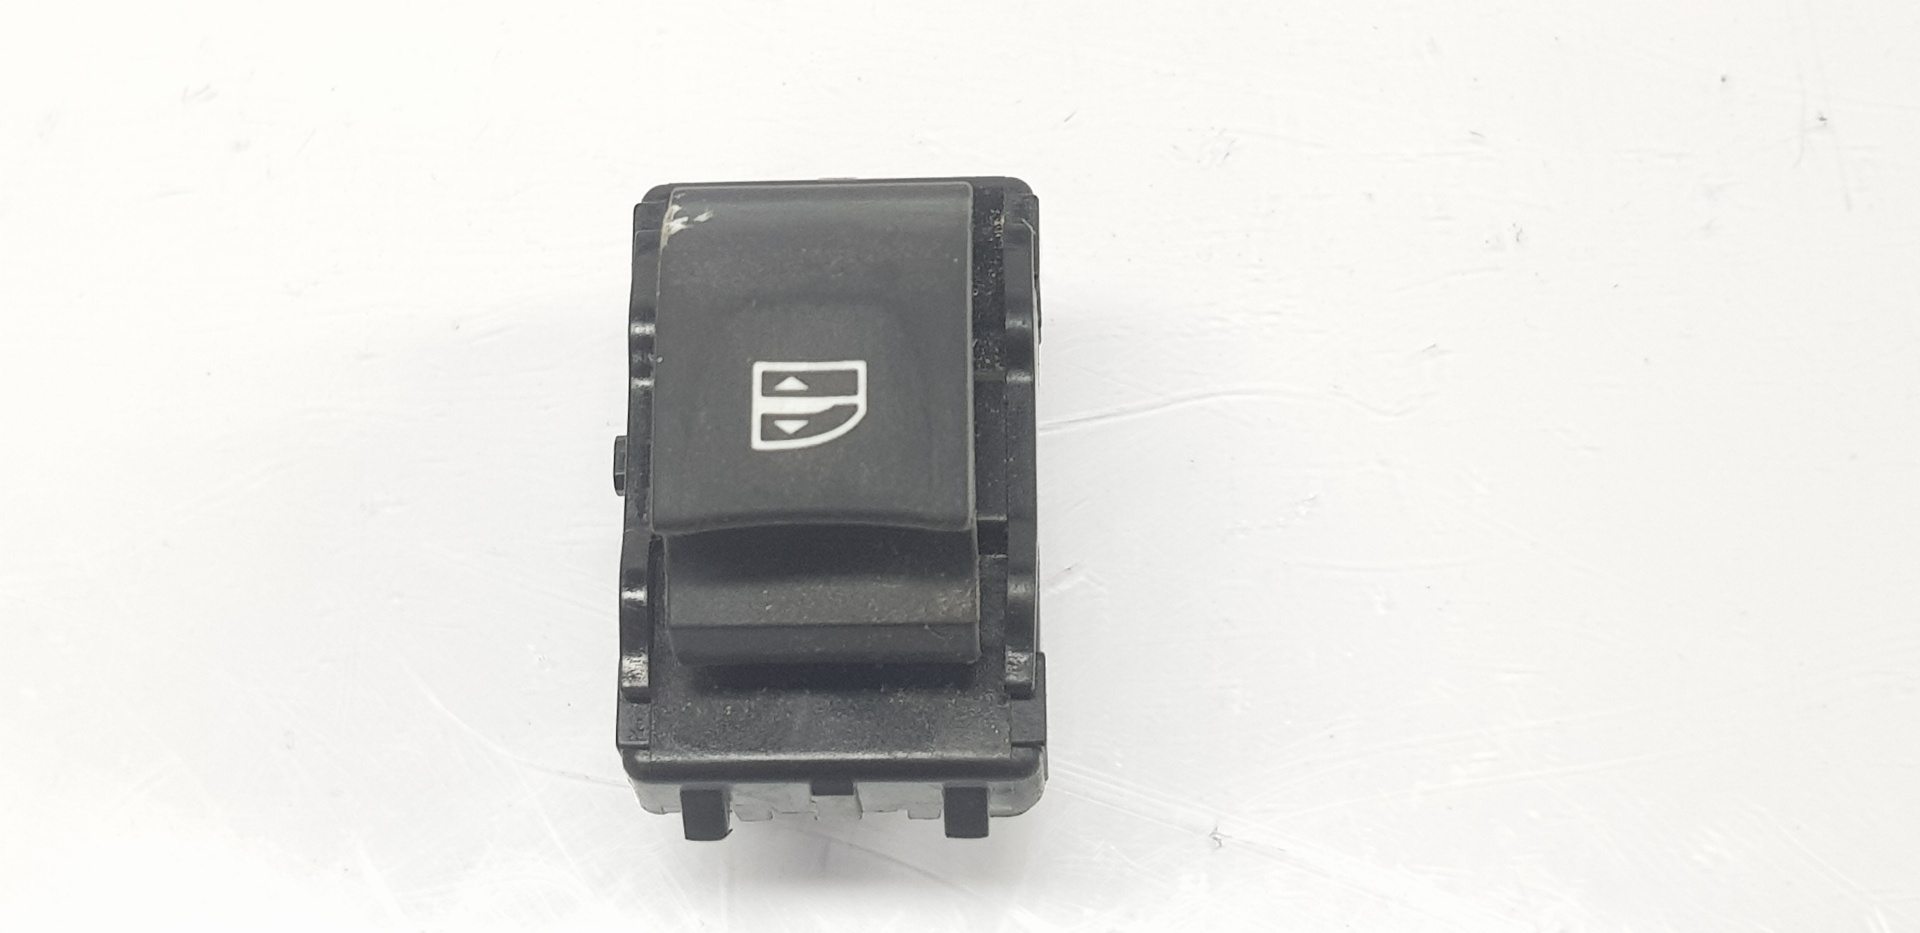 RENAULT Scenic 3 generation (2009-2015) Rear Right Door Window Control Switch 254010003R, 254010003R 19937874